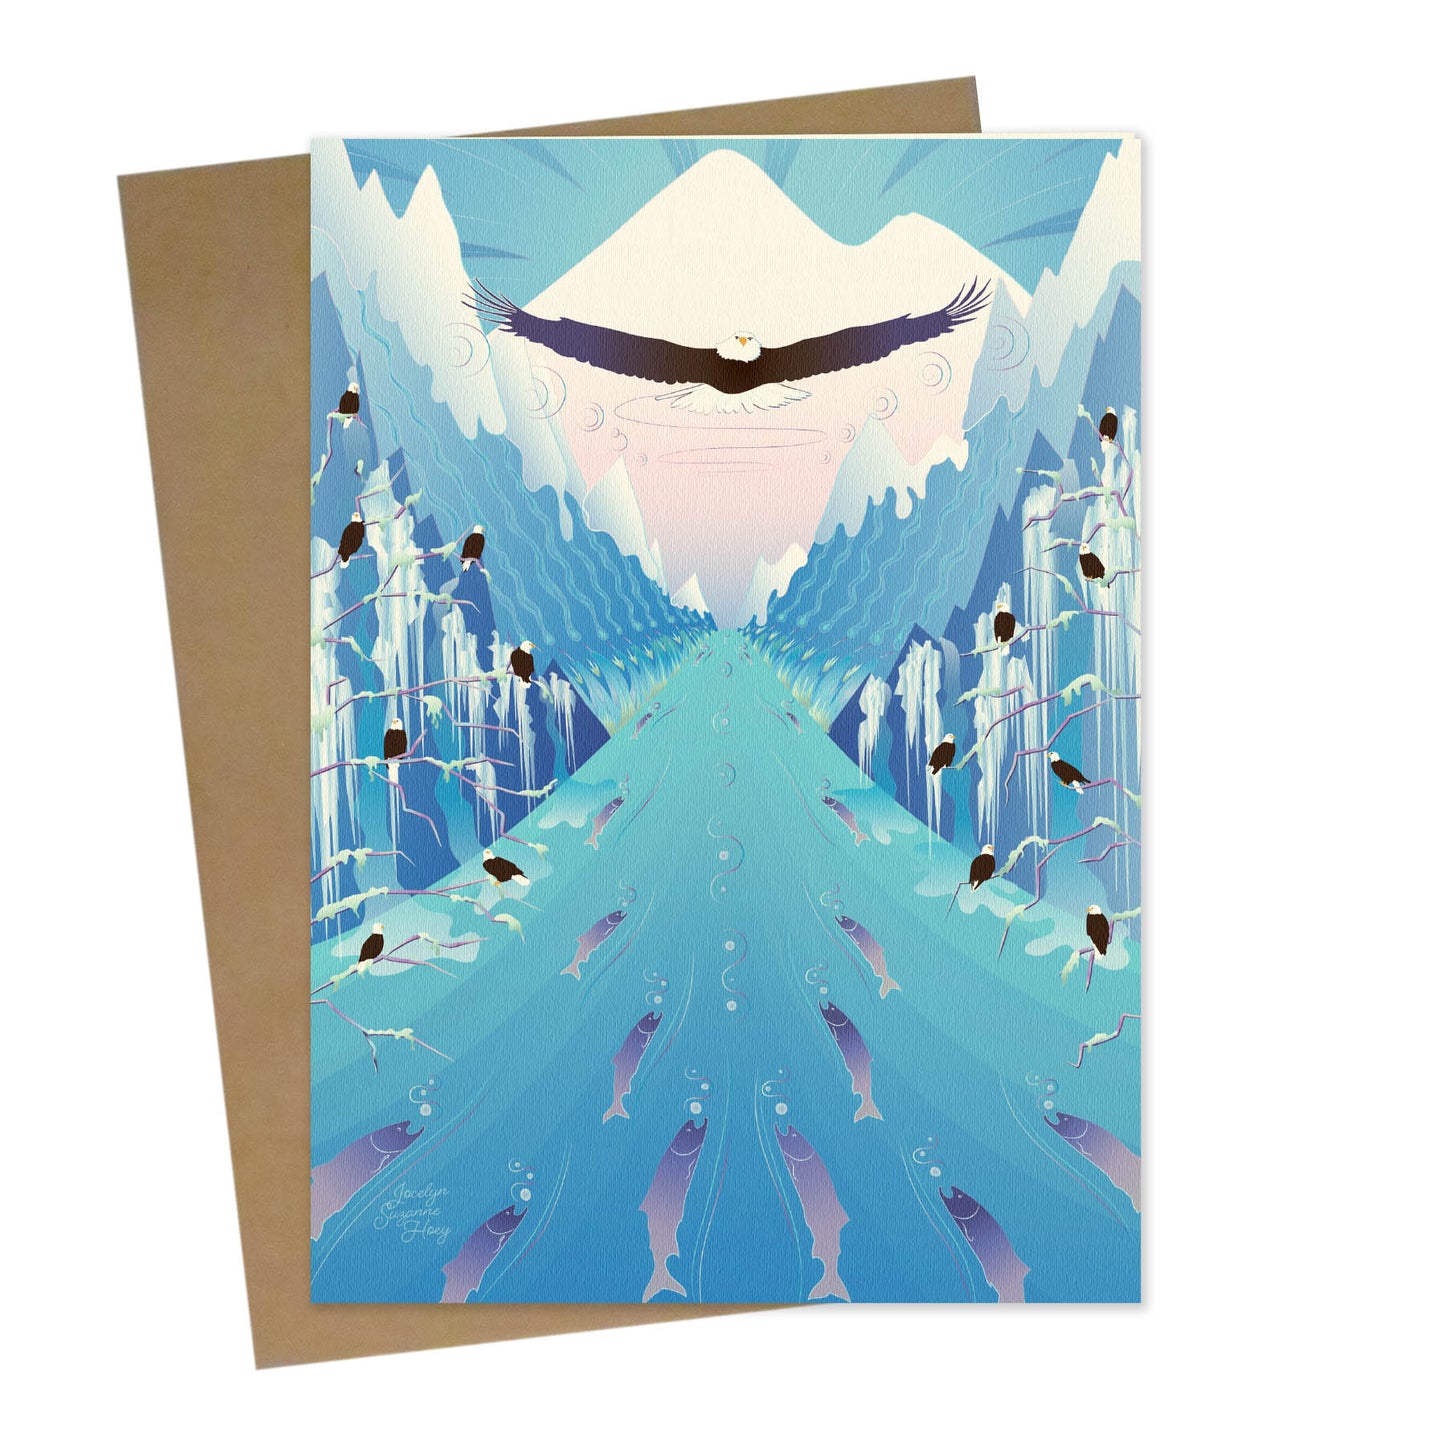 Mockup for greeting card digital design showing salmon swimming upstream, while eagles roost in the trees in an imaginary scene with one eagle flying in front of a mountain with snowy peaks